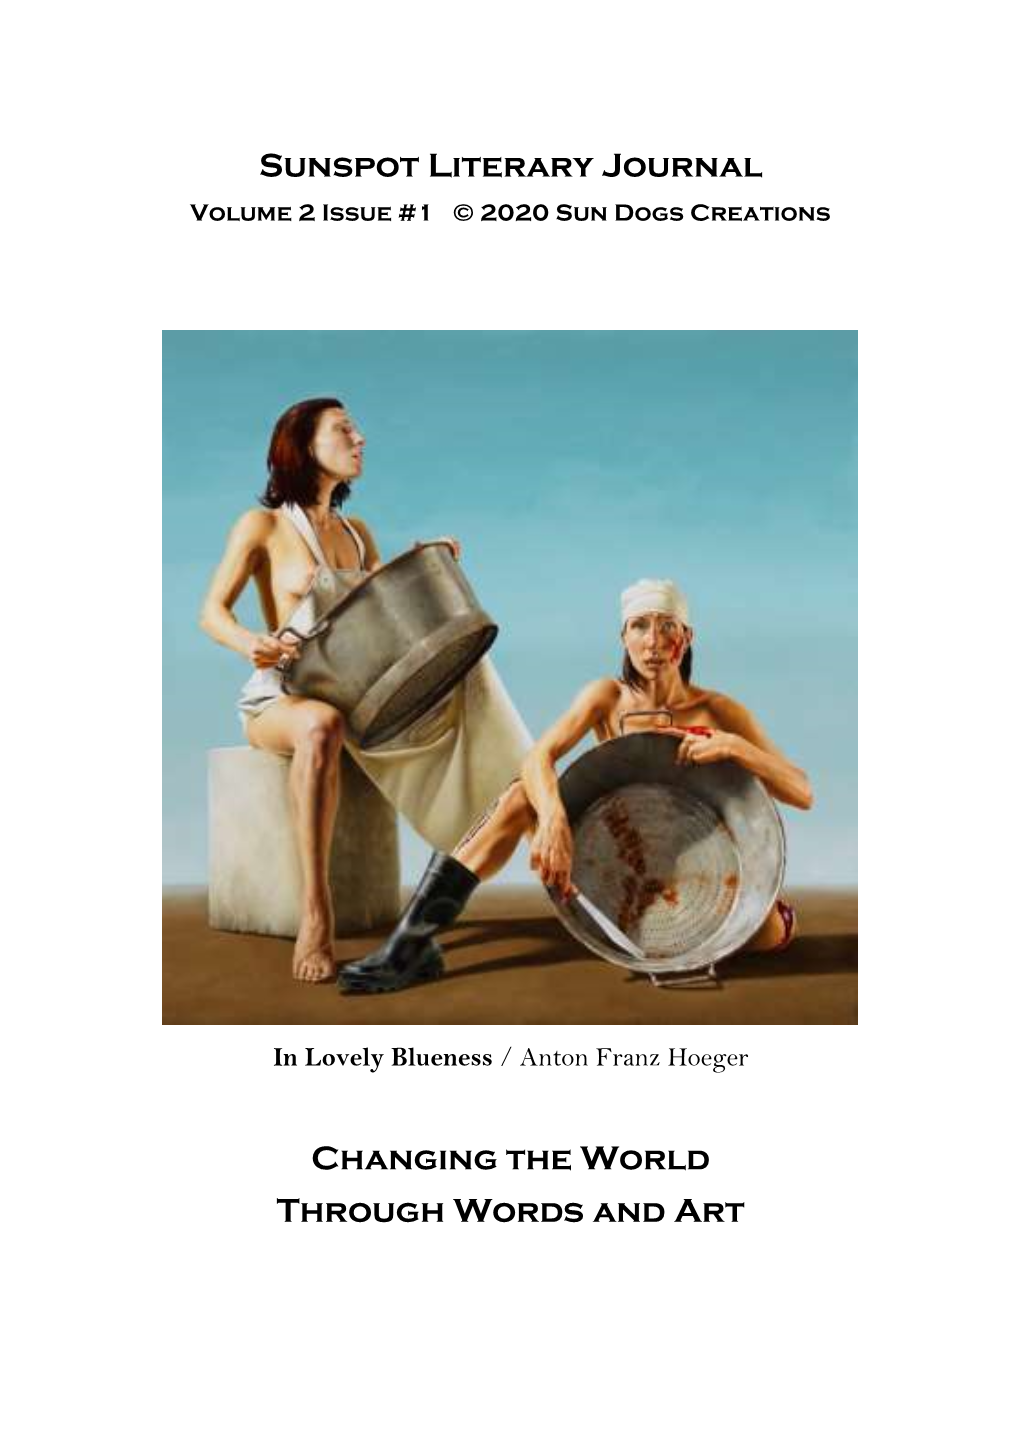 Sunspot Literary Journal Changing the World Through Words And